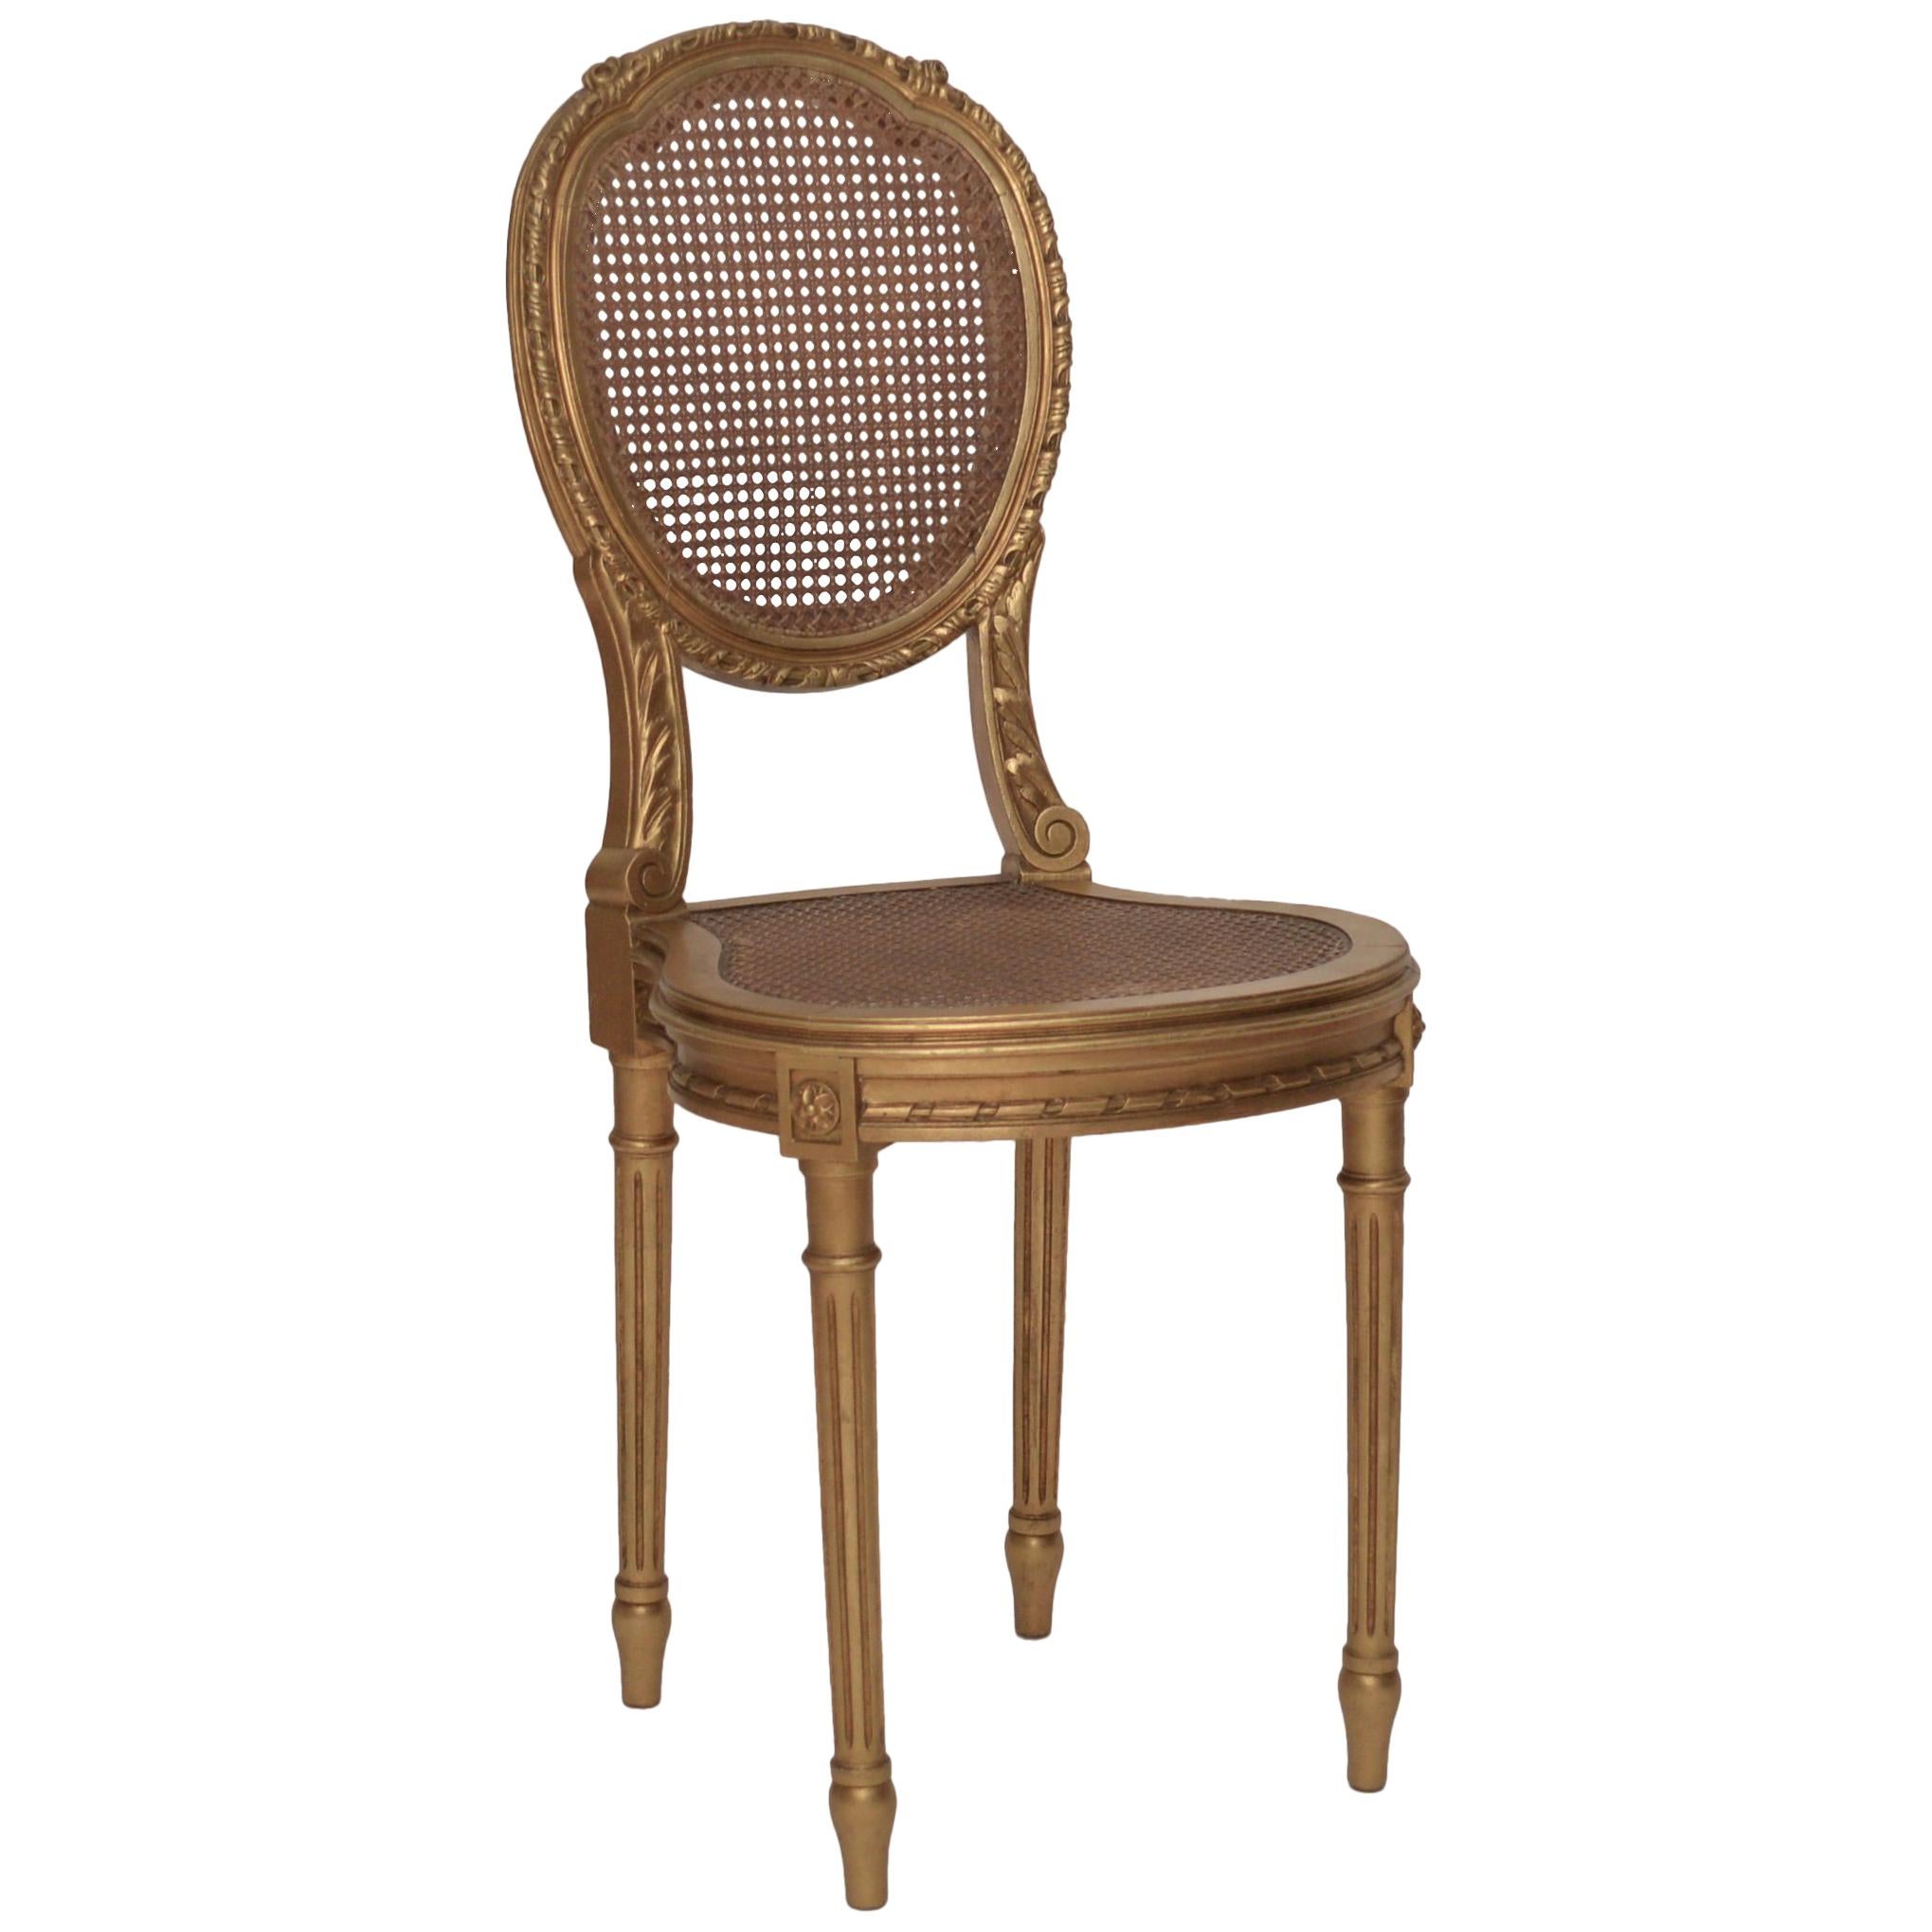 Vintage French Rattan Chair